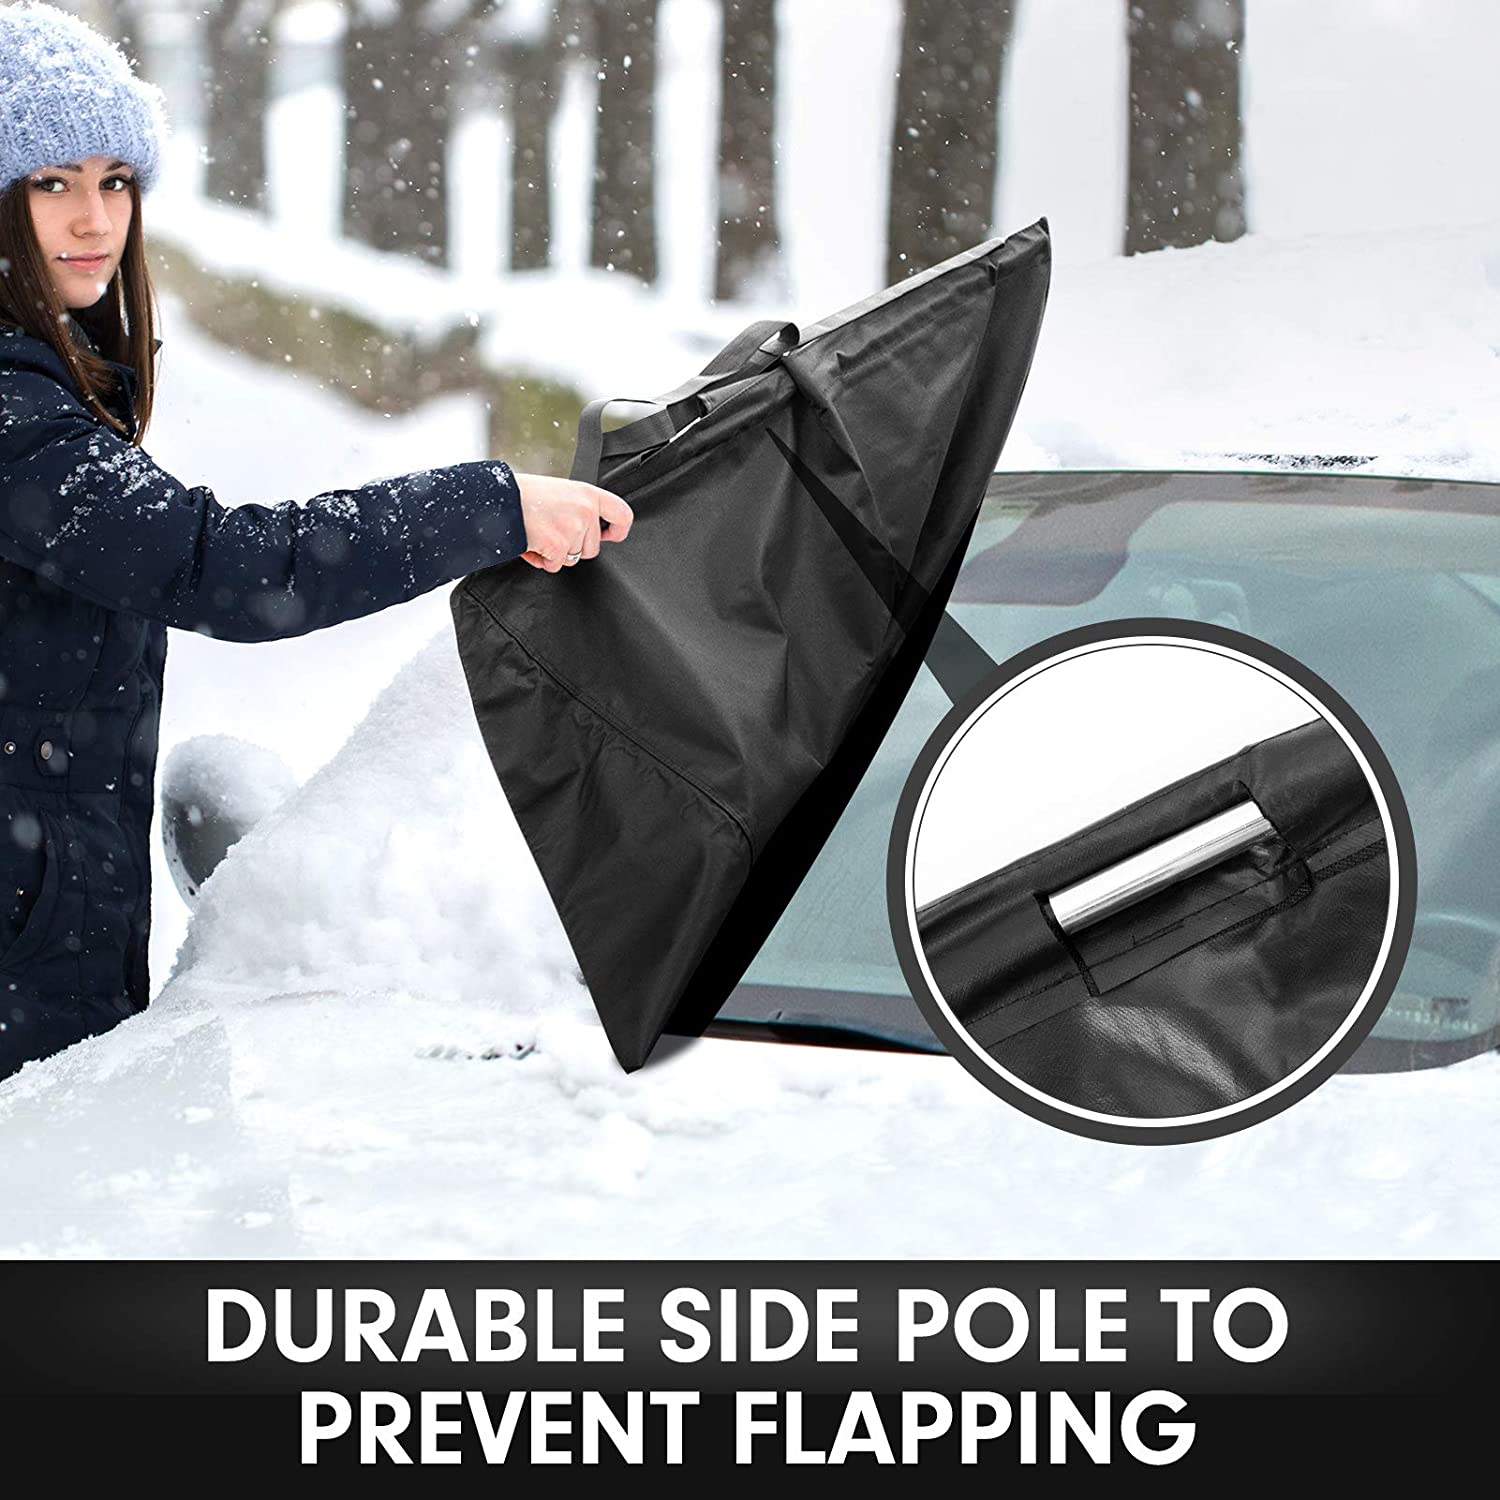 Windshied Sonw Cover,Windshield Snow Ice Covers with 2 Side Mirrer Covers &2 in 1 Beef Tendon Snow Shovel for Most Vehicles,SUVs,Cars Trucks.Winter Snow Defender Frost Guard and Summer Shading 